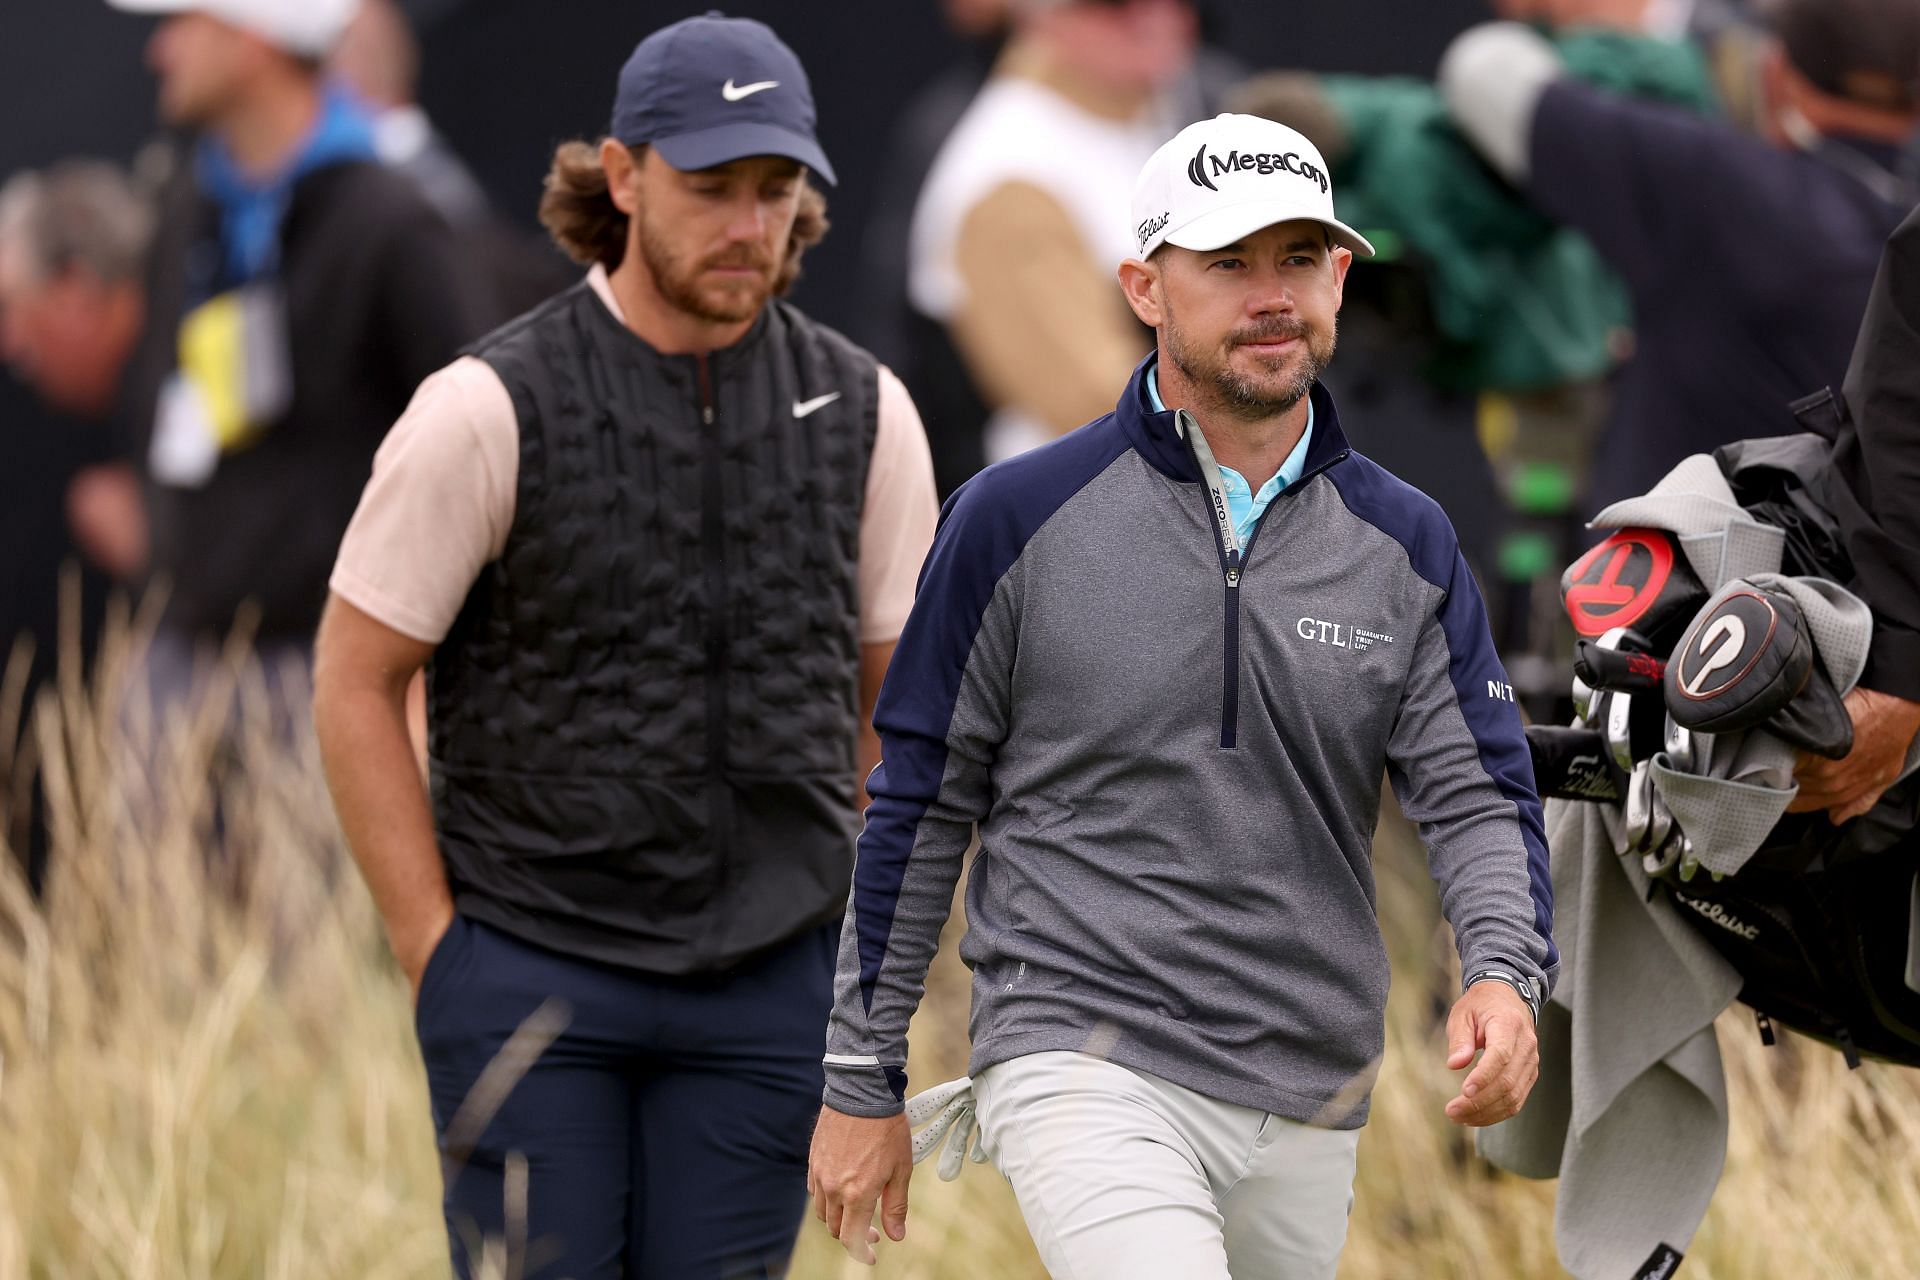 Tommy Fleetwood and Brian Harman at the British Open (via Getty Images)